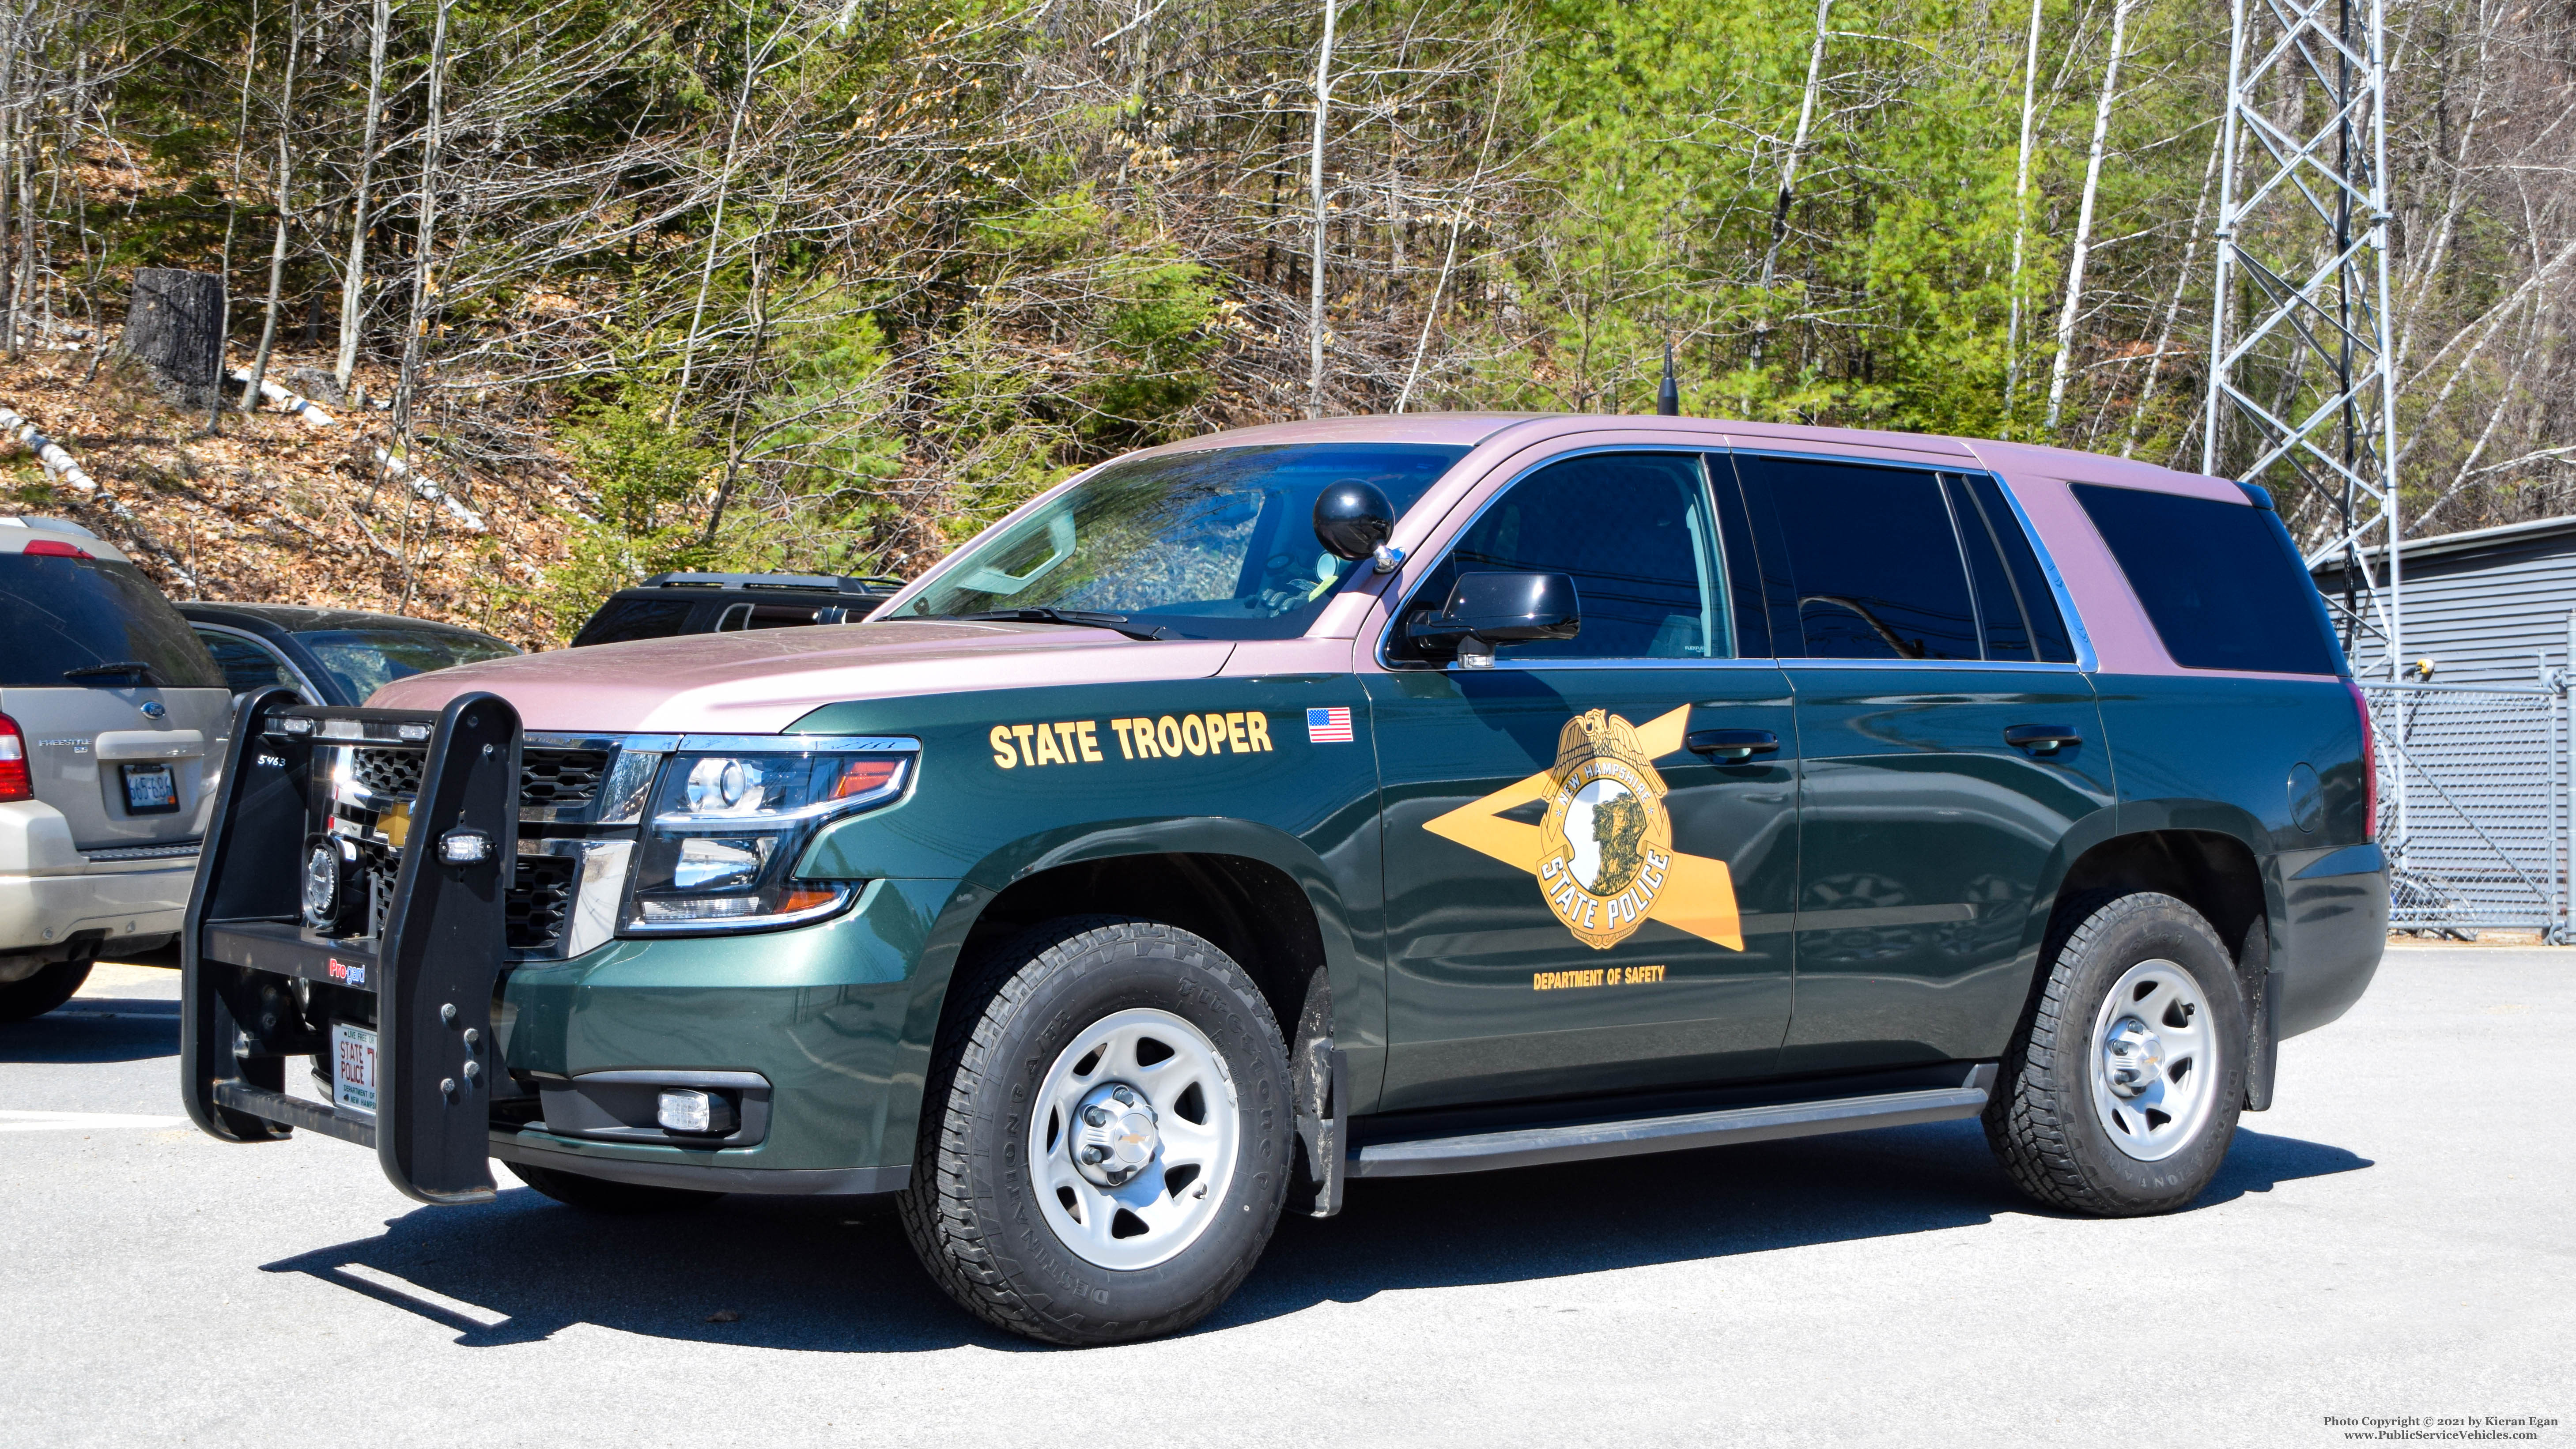 A photo  of New Hampshire State Police
            Cruiser 734, a 2019 Chevrolet Tahoe             taken by Kieran Egan